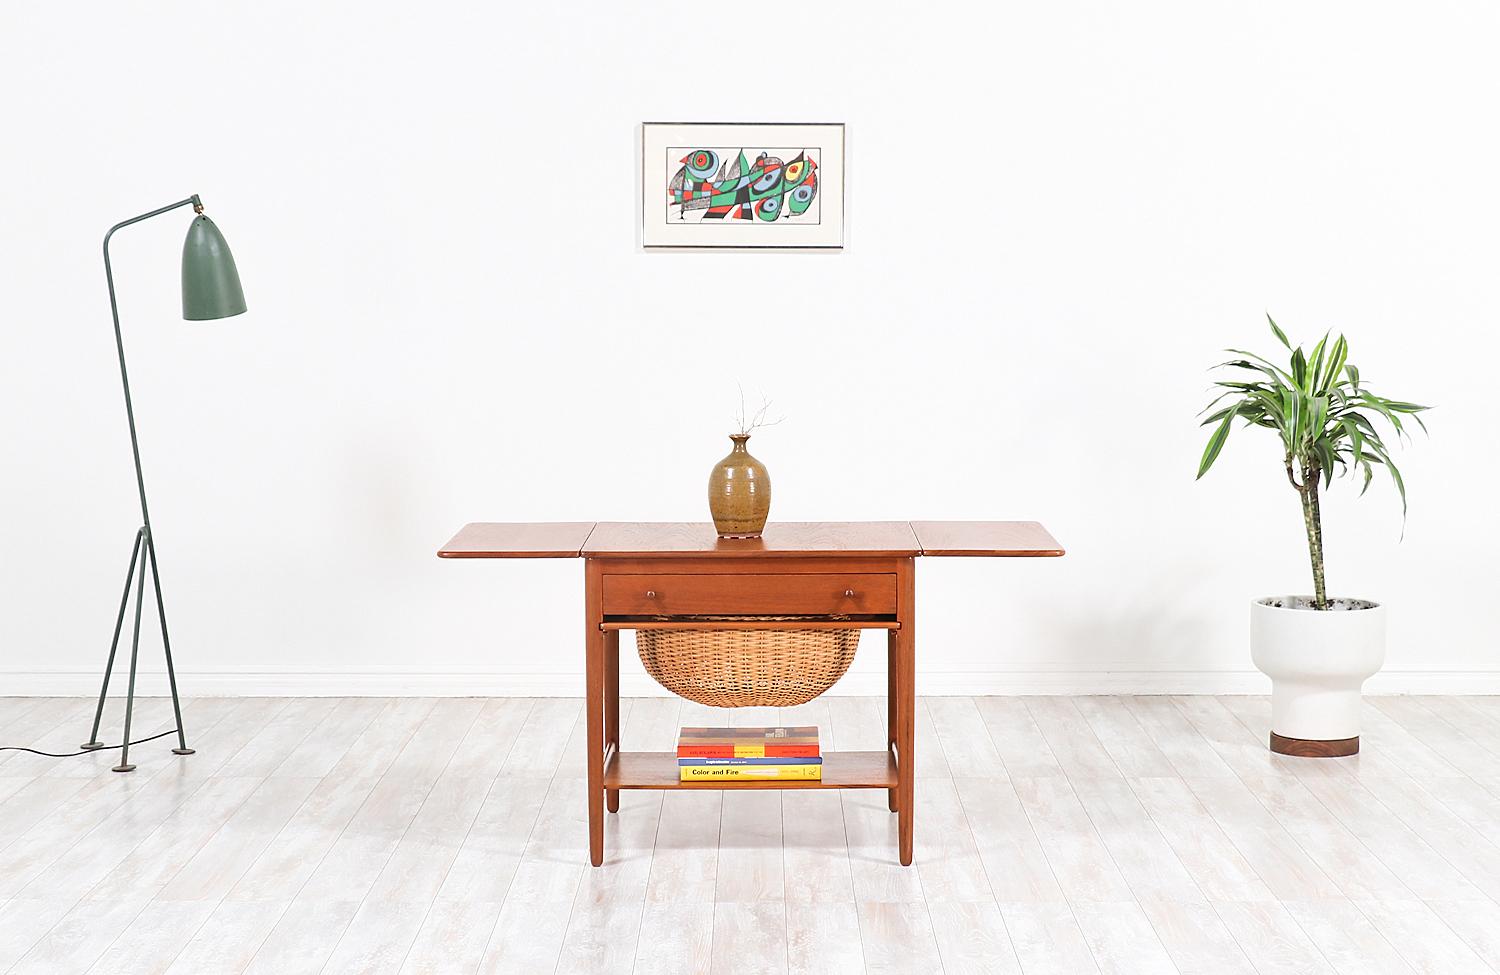 Danish modern sewing table designed by fame architect, Hans J. Wegner. This example was designed in collaboration with the Danish company Andreas Tuck who made most of the tables he designed in Denmark during the 1950s. Like every Wegner design, the